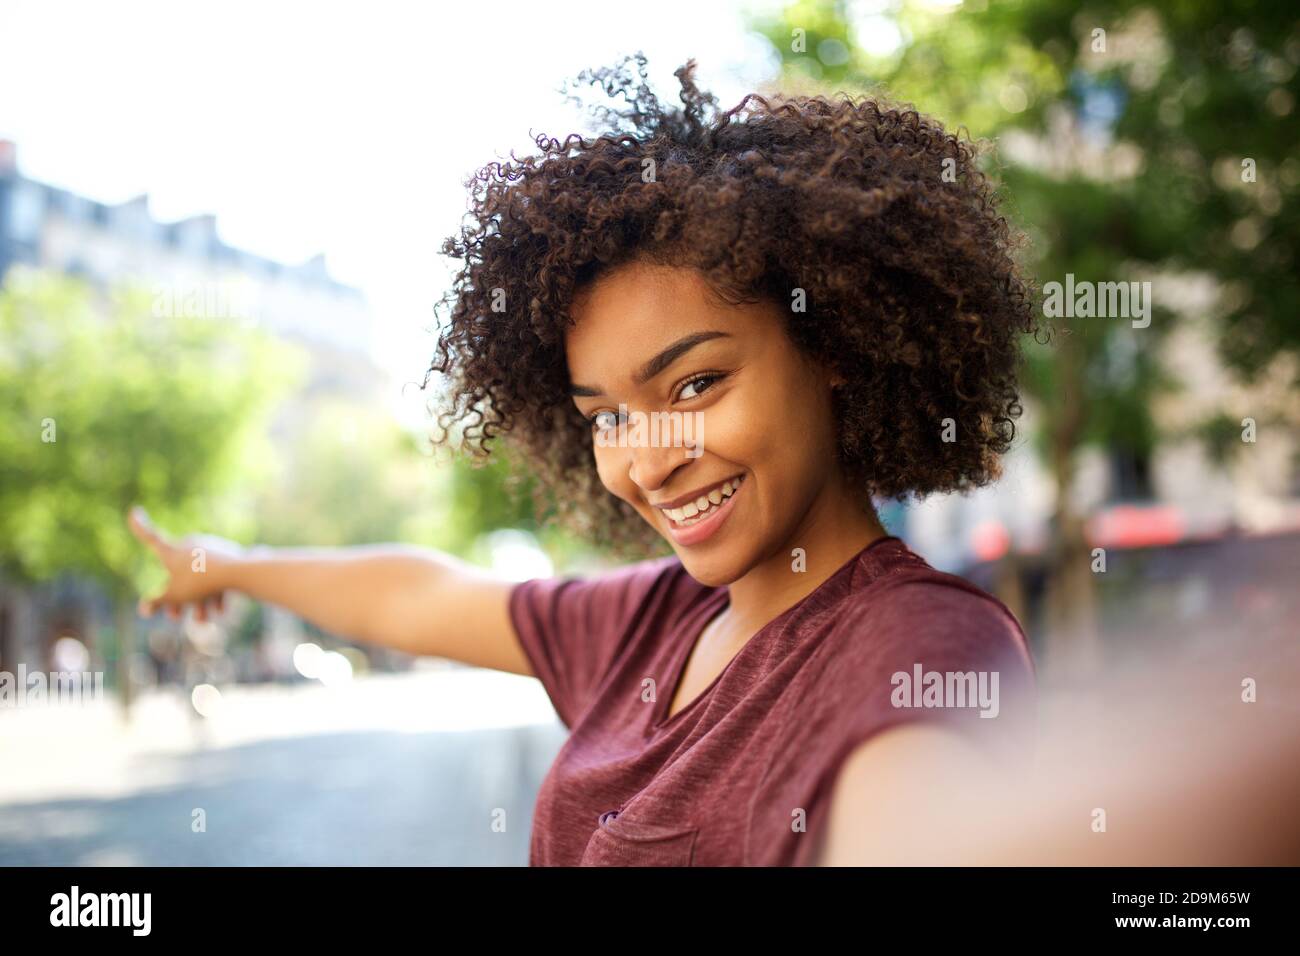 Close up portrait smiling young african american woman with curly hair ...